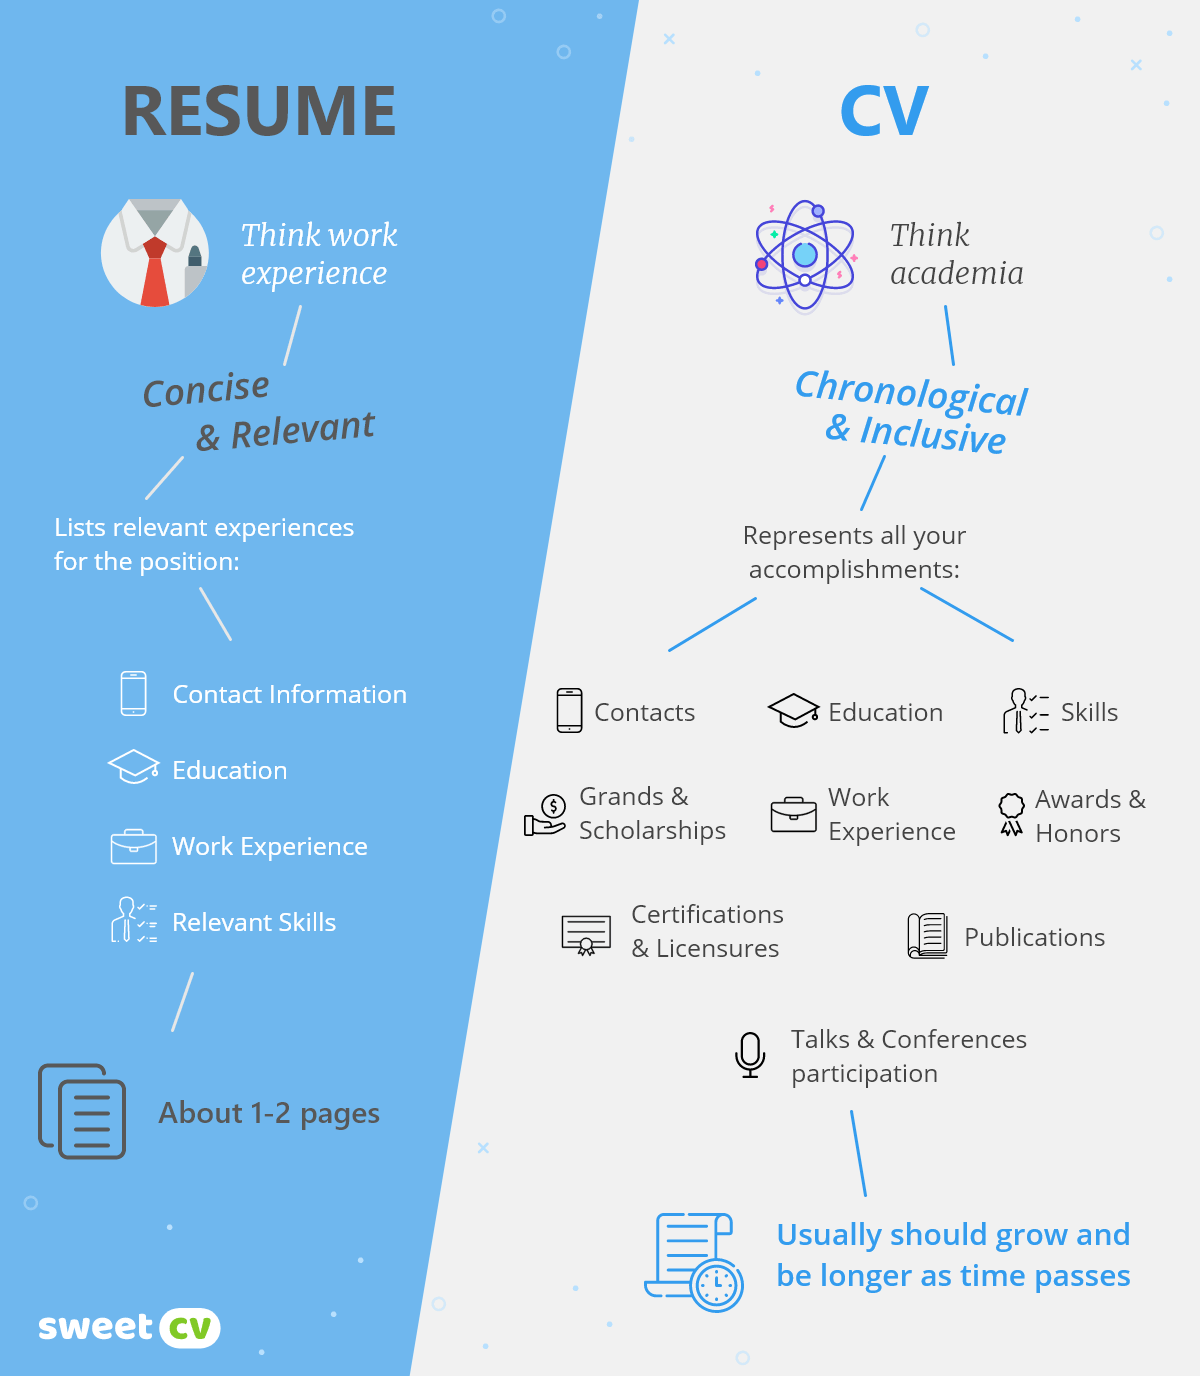 Need More Time? Read These Tips To Eliminate resume